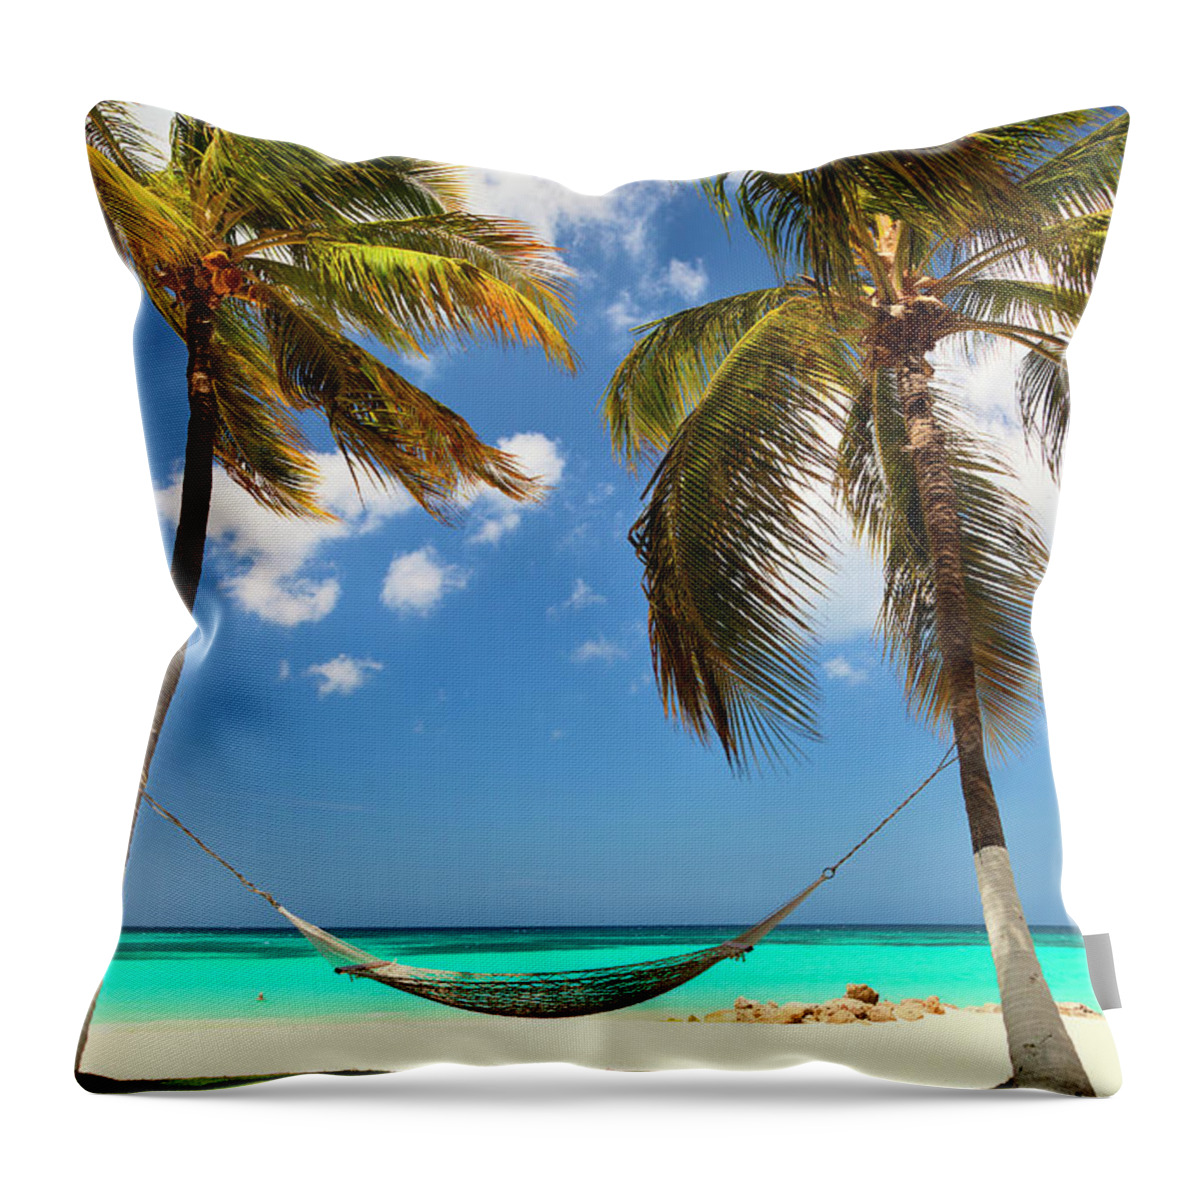 Estock Throw Pillow featuring the digital art Palm Tress And Hammock At Beach by Claudia Uripos